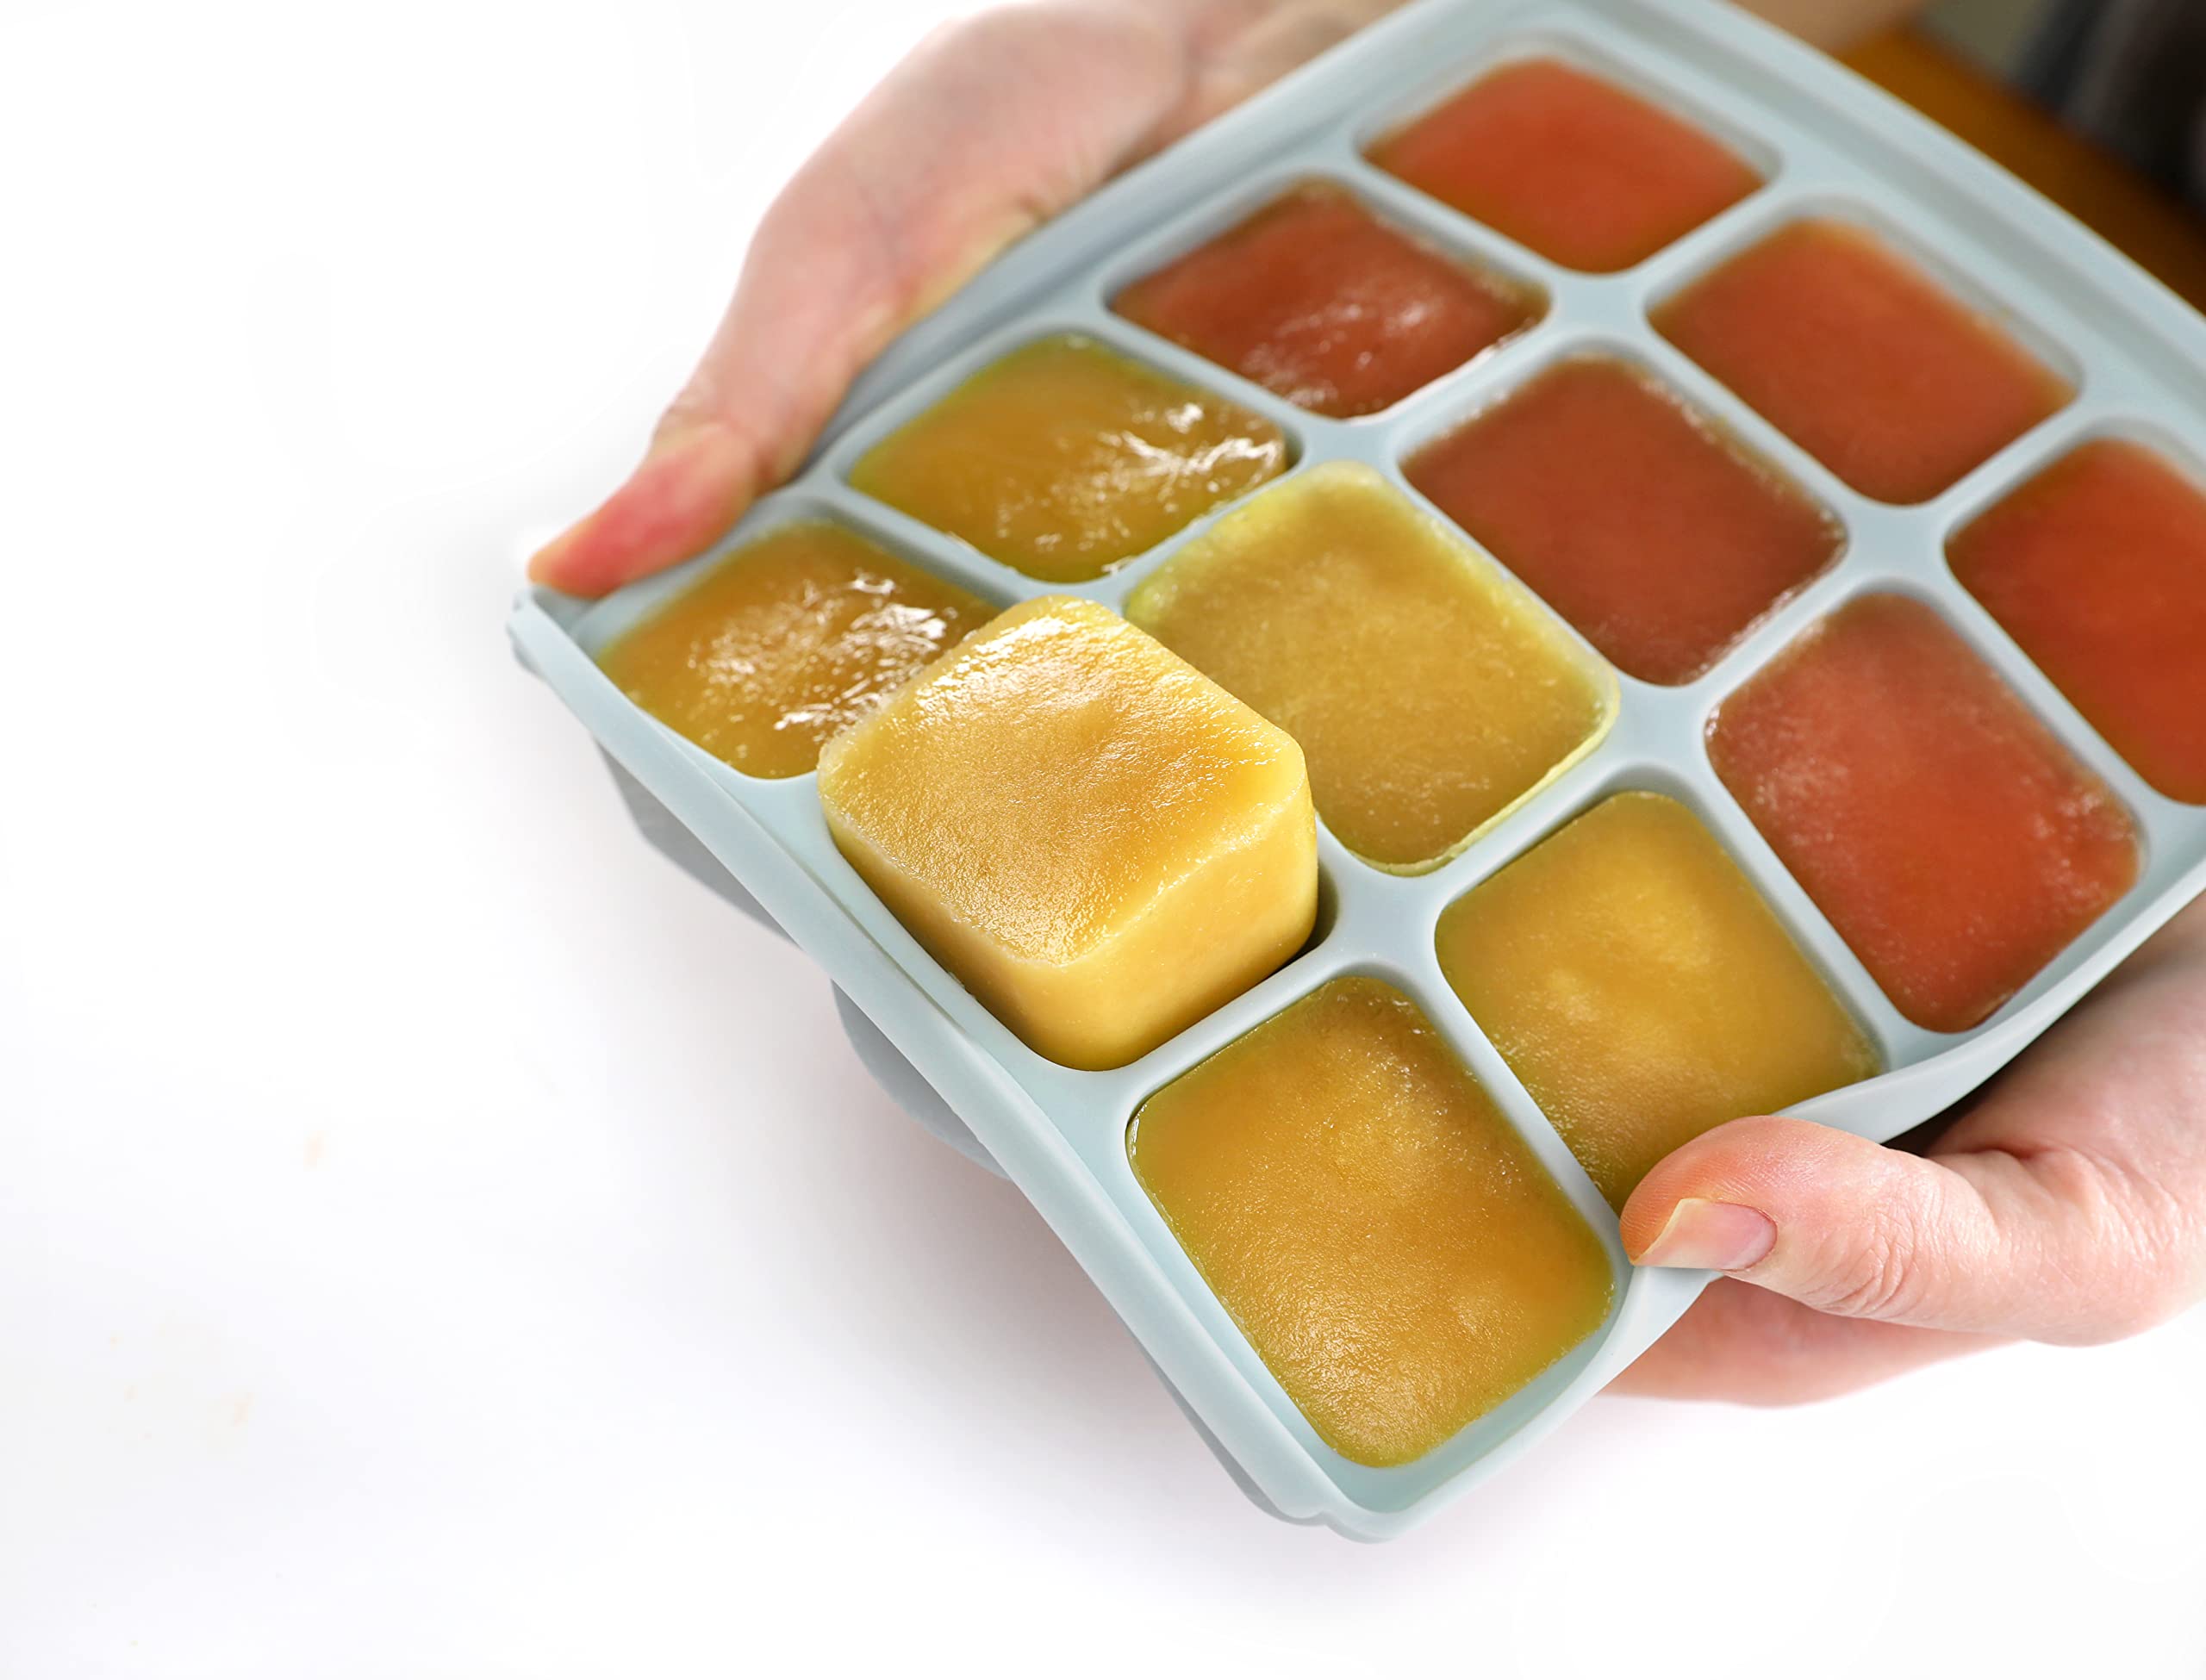 PETINUBE Silicone Freezer Tray, Baby Food Storage Cubes with Clip-On Lid, Freeze Baby Food, Soups, Purees, Ice, Easy and Safe Design, Made in Korea (12, Ocean Blue)